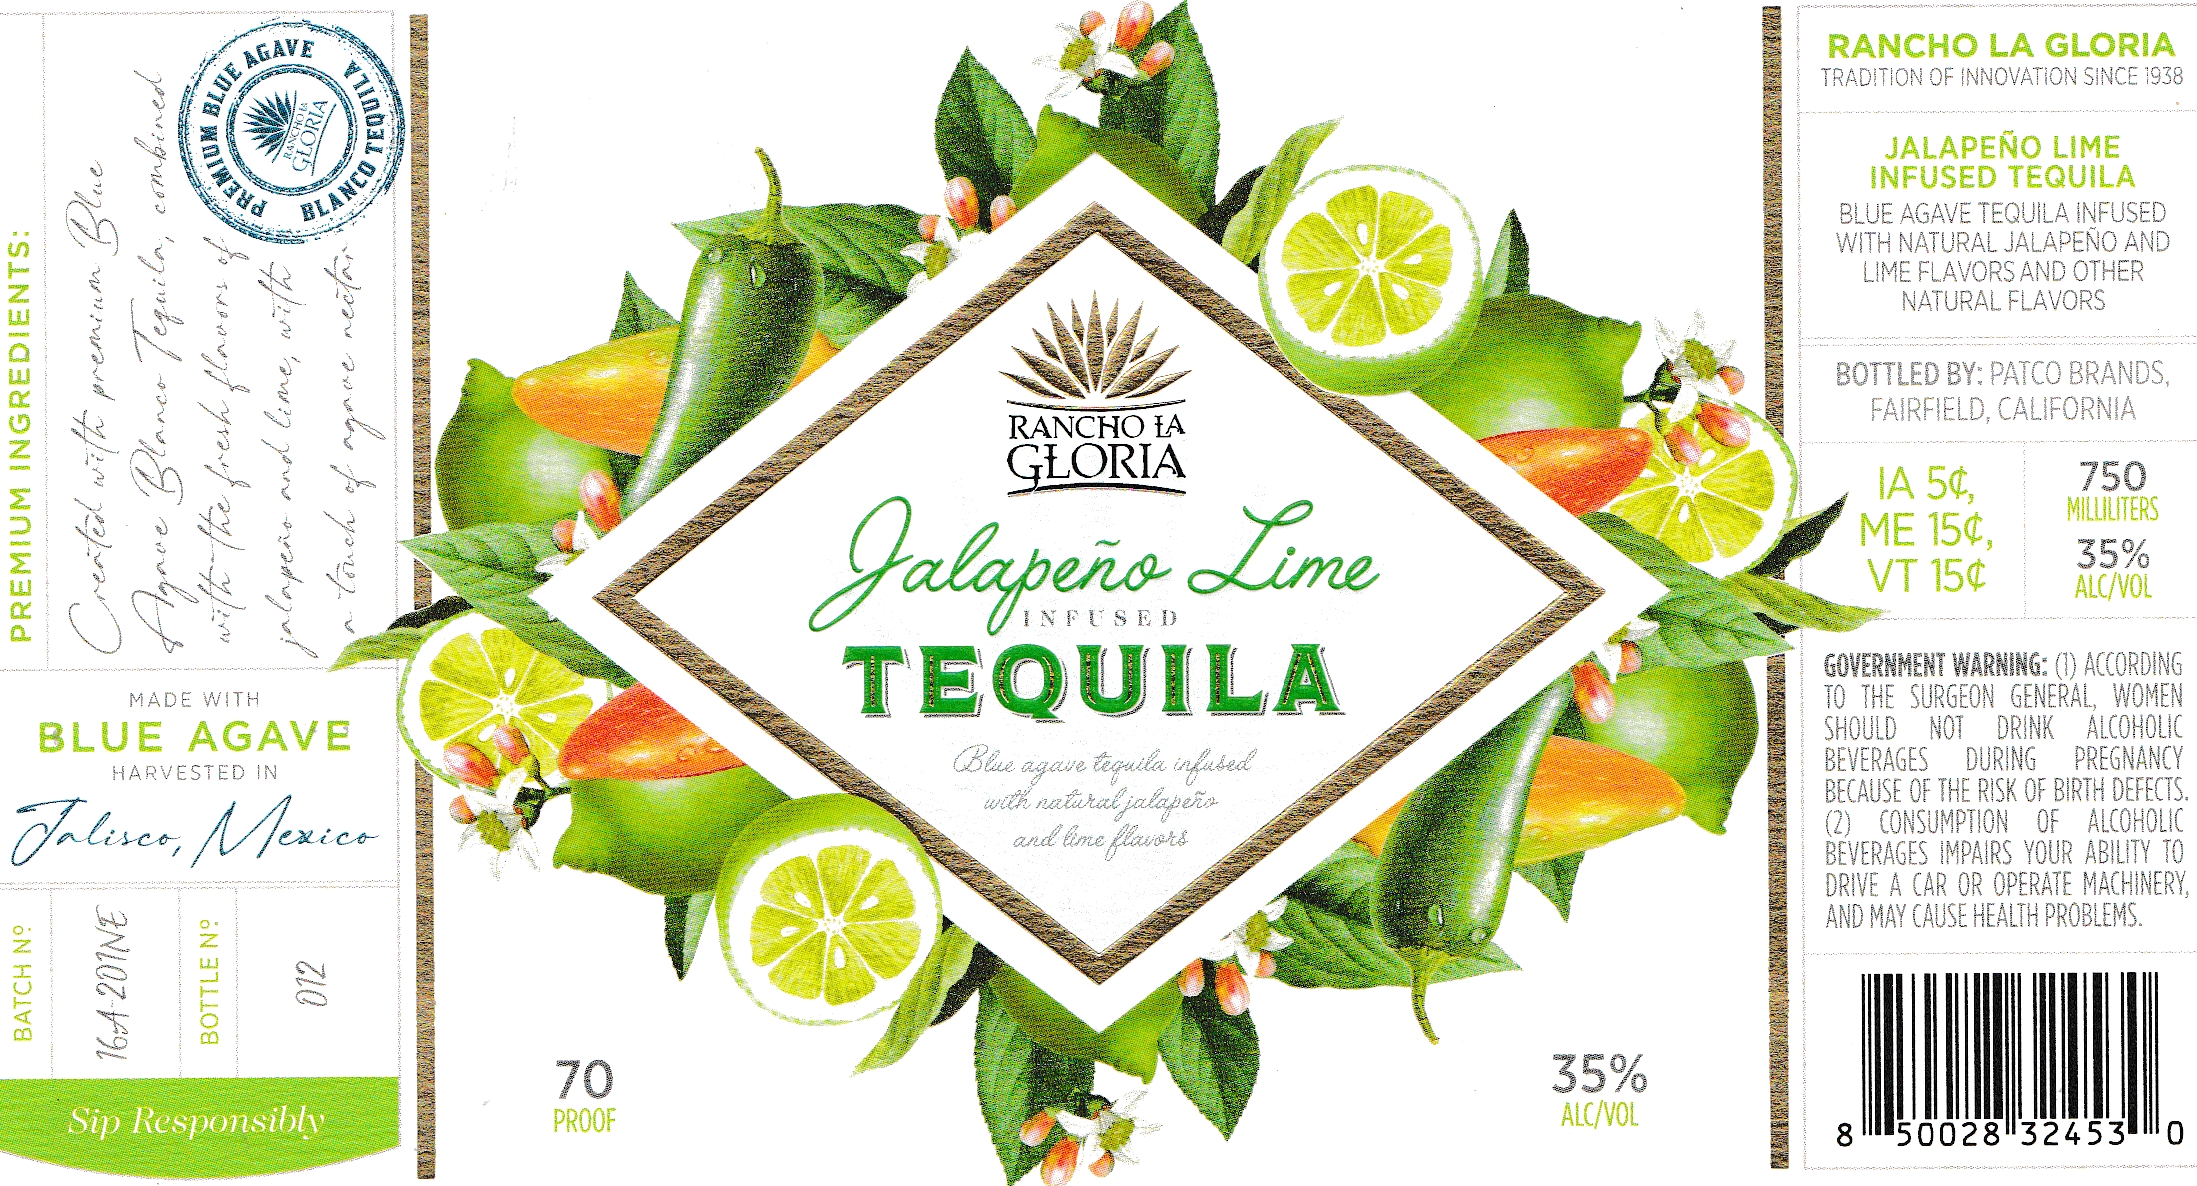 AWT Labels & Packaging Anaheim, USA for Rancho La Gloria Jalapeño Lime Infused Tequila, submitted by TLMI (USA)